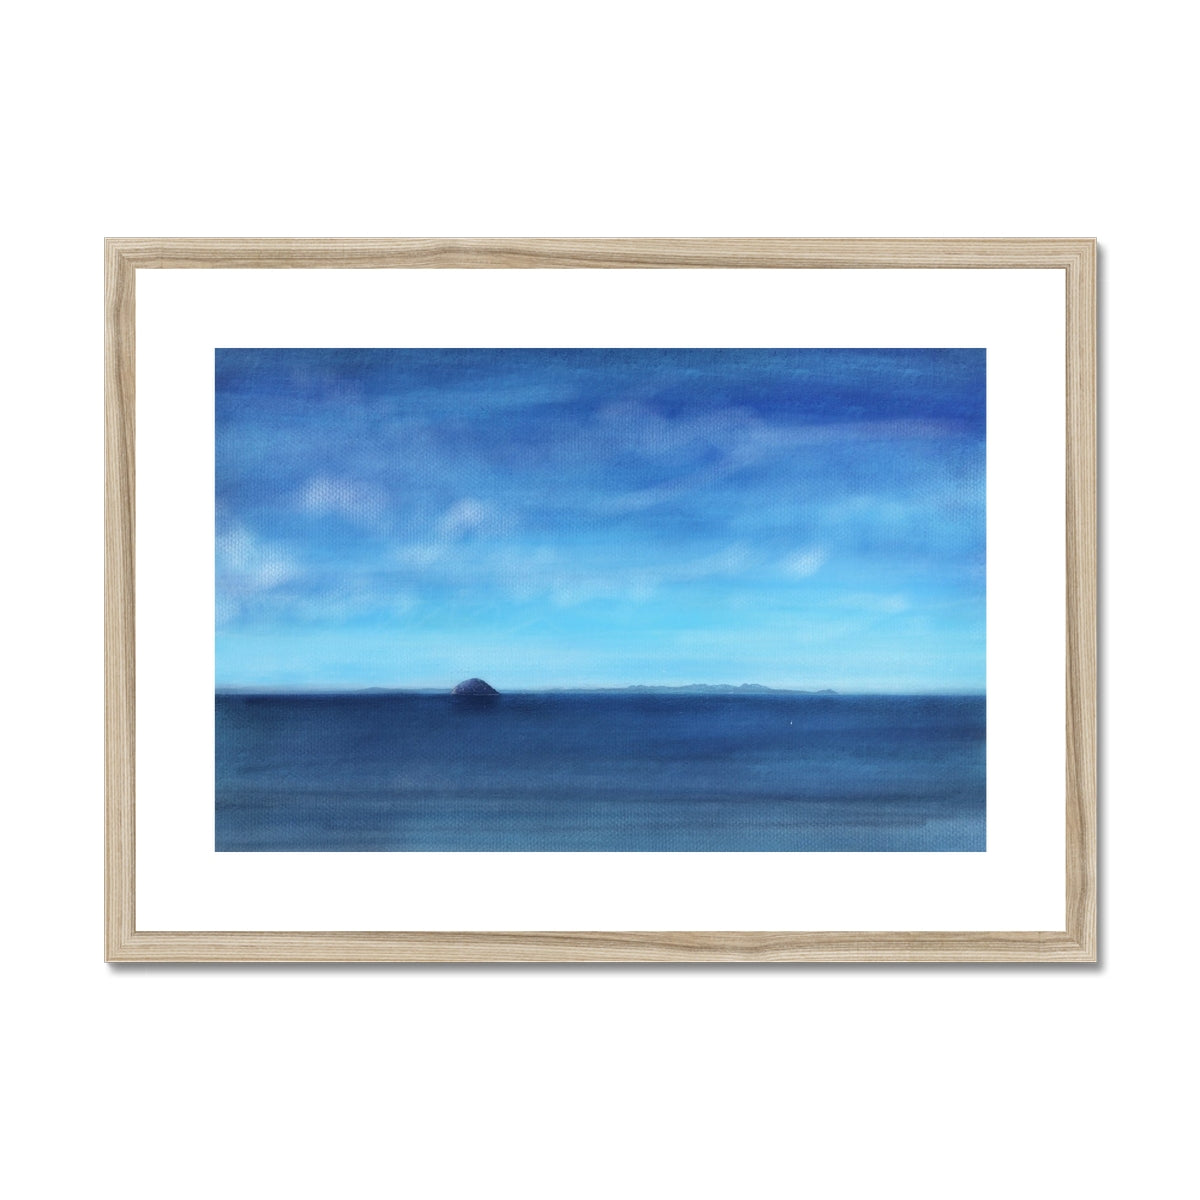 Ailsa Craig & Arran Painting | Framed & Mounted Prints From Scotland-Framed & Mounted Prints-Arran Art Gallery-A2 Landscape-Natural Frame-Paintings, Prints, Homeware, Art Gifts From Scotland By Scottish Artist Kevin Hunter